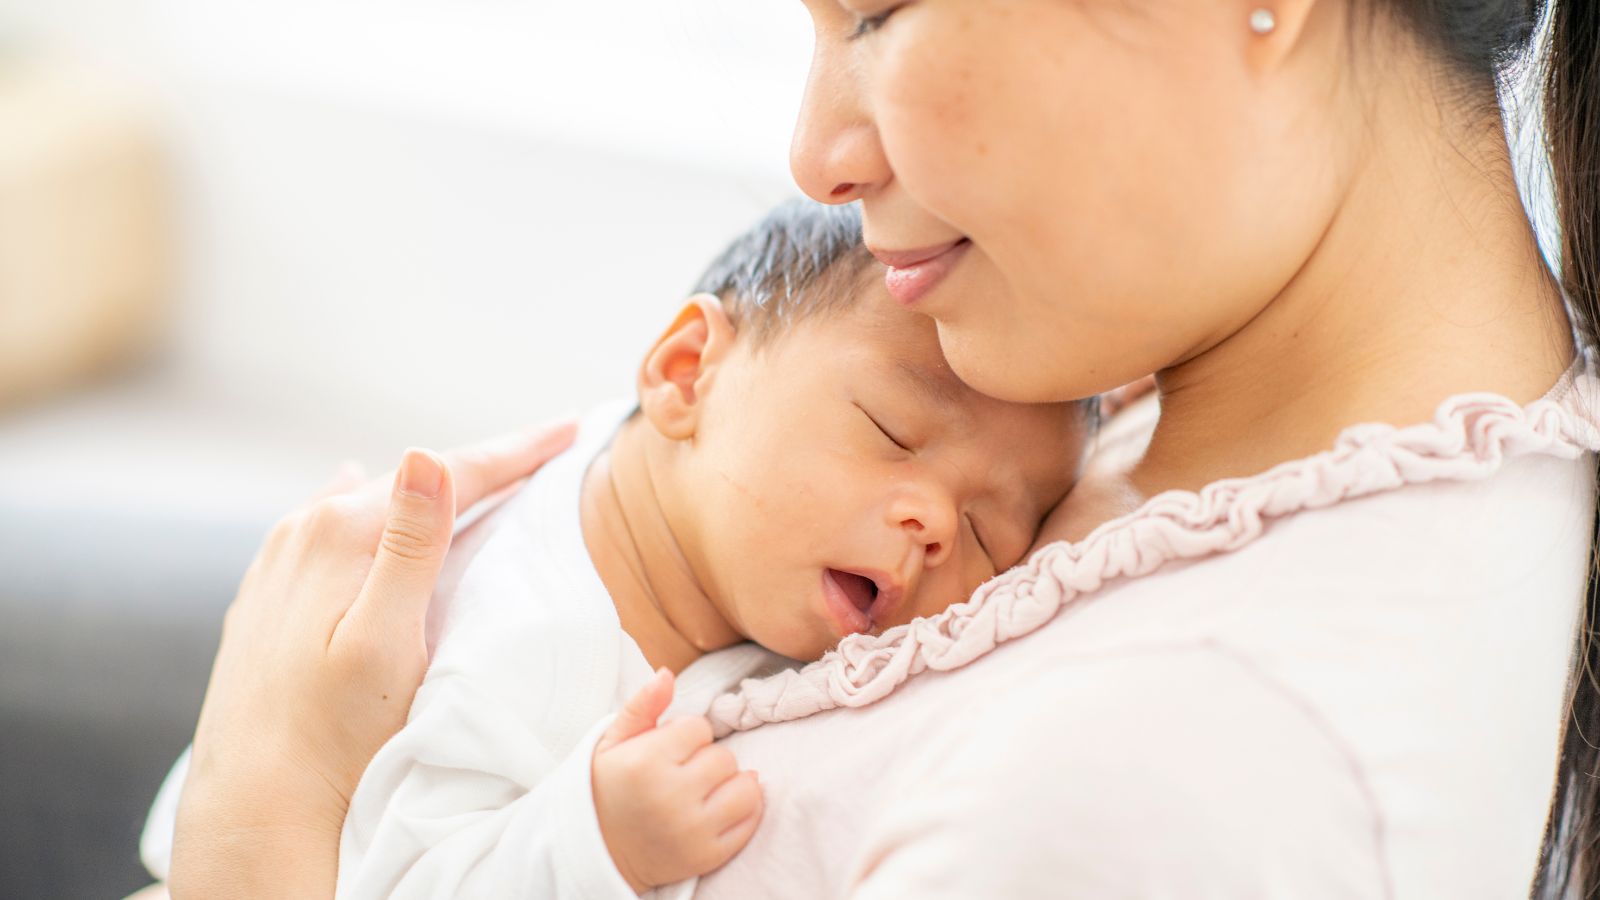 Most People Want to Breastfeed, But Need More Support To Do So